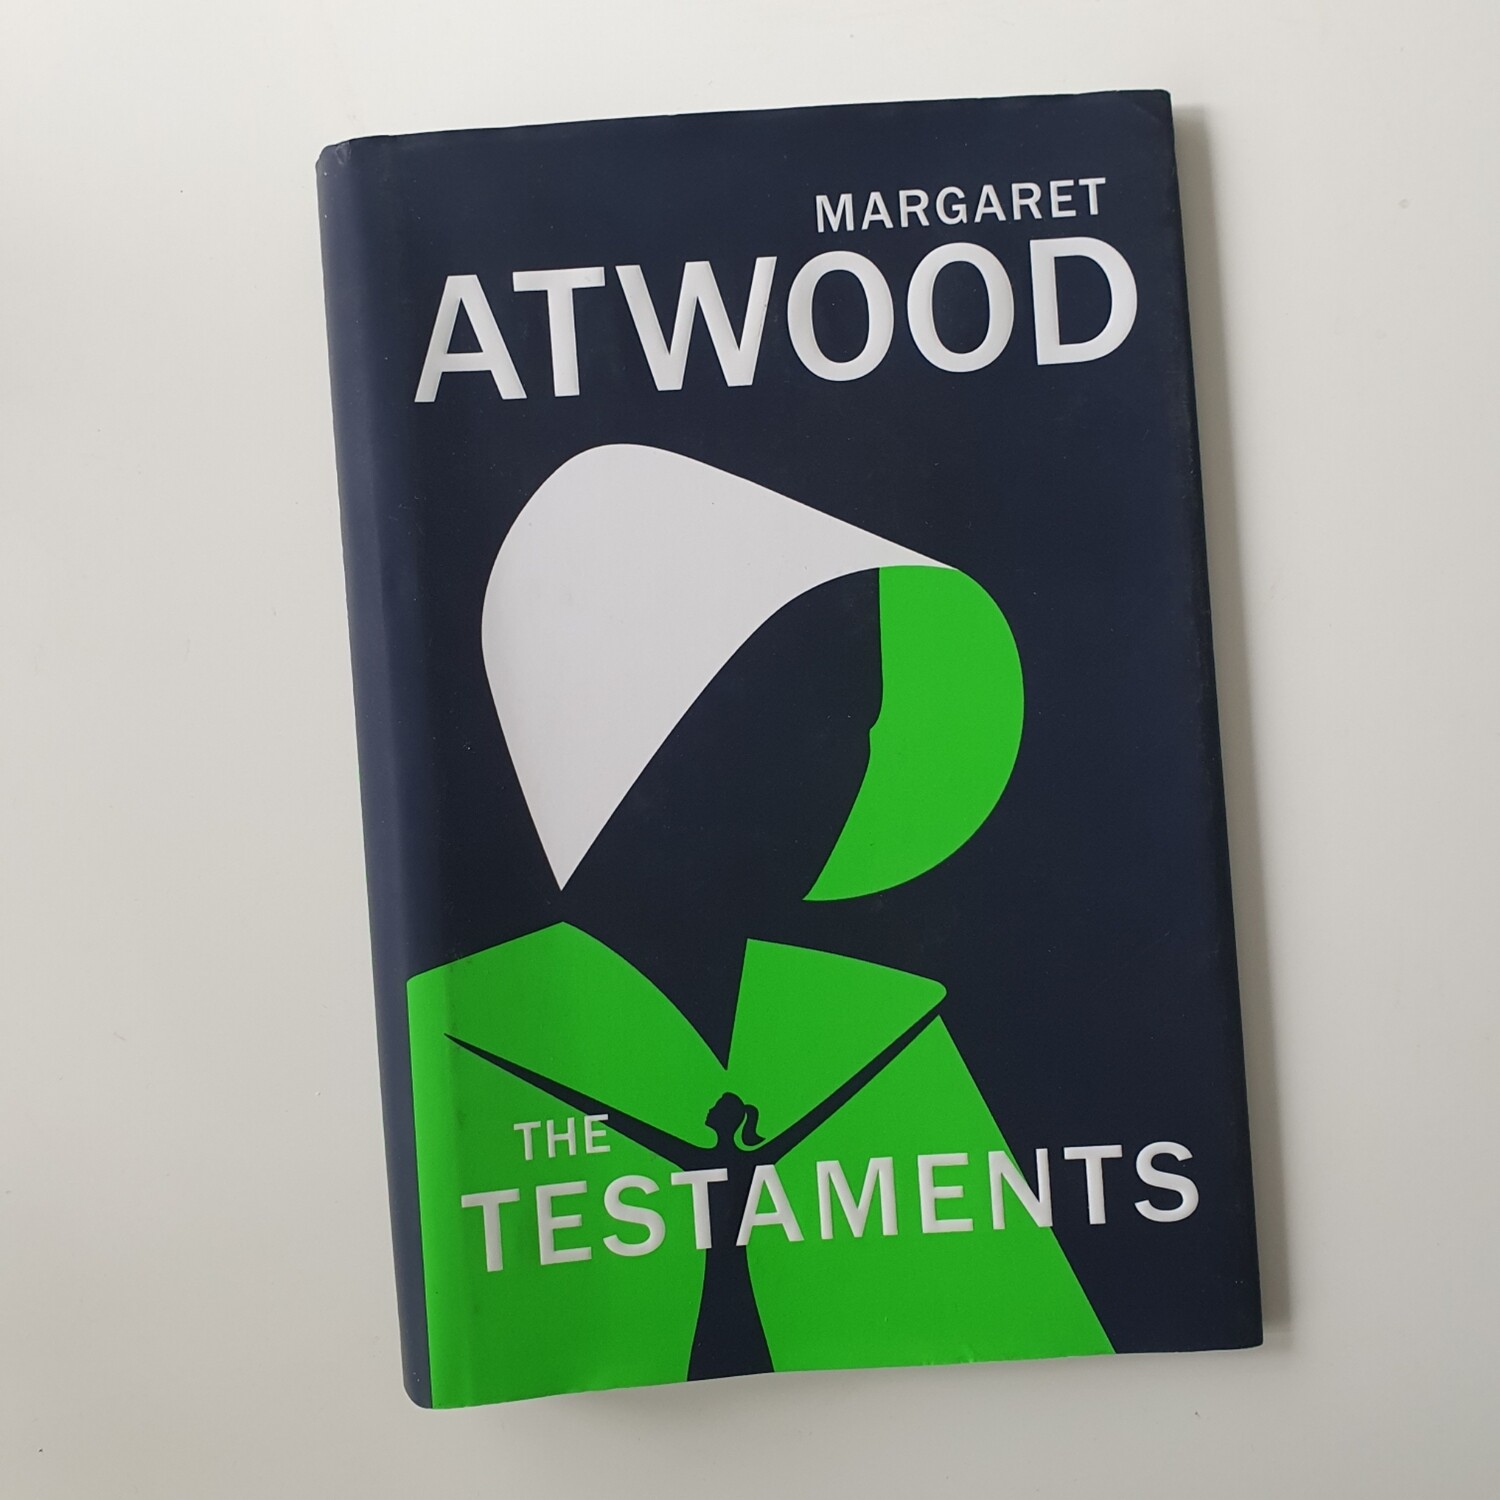 The Testaments - Margaret Atwood - Handmaid's Tale - Made from a dust jacket